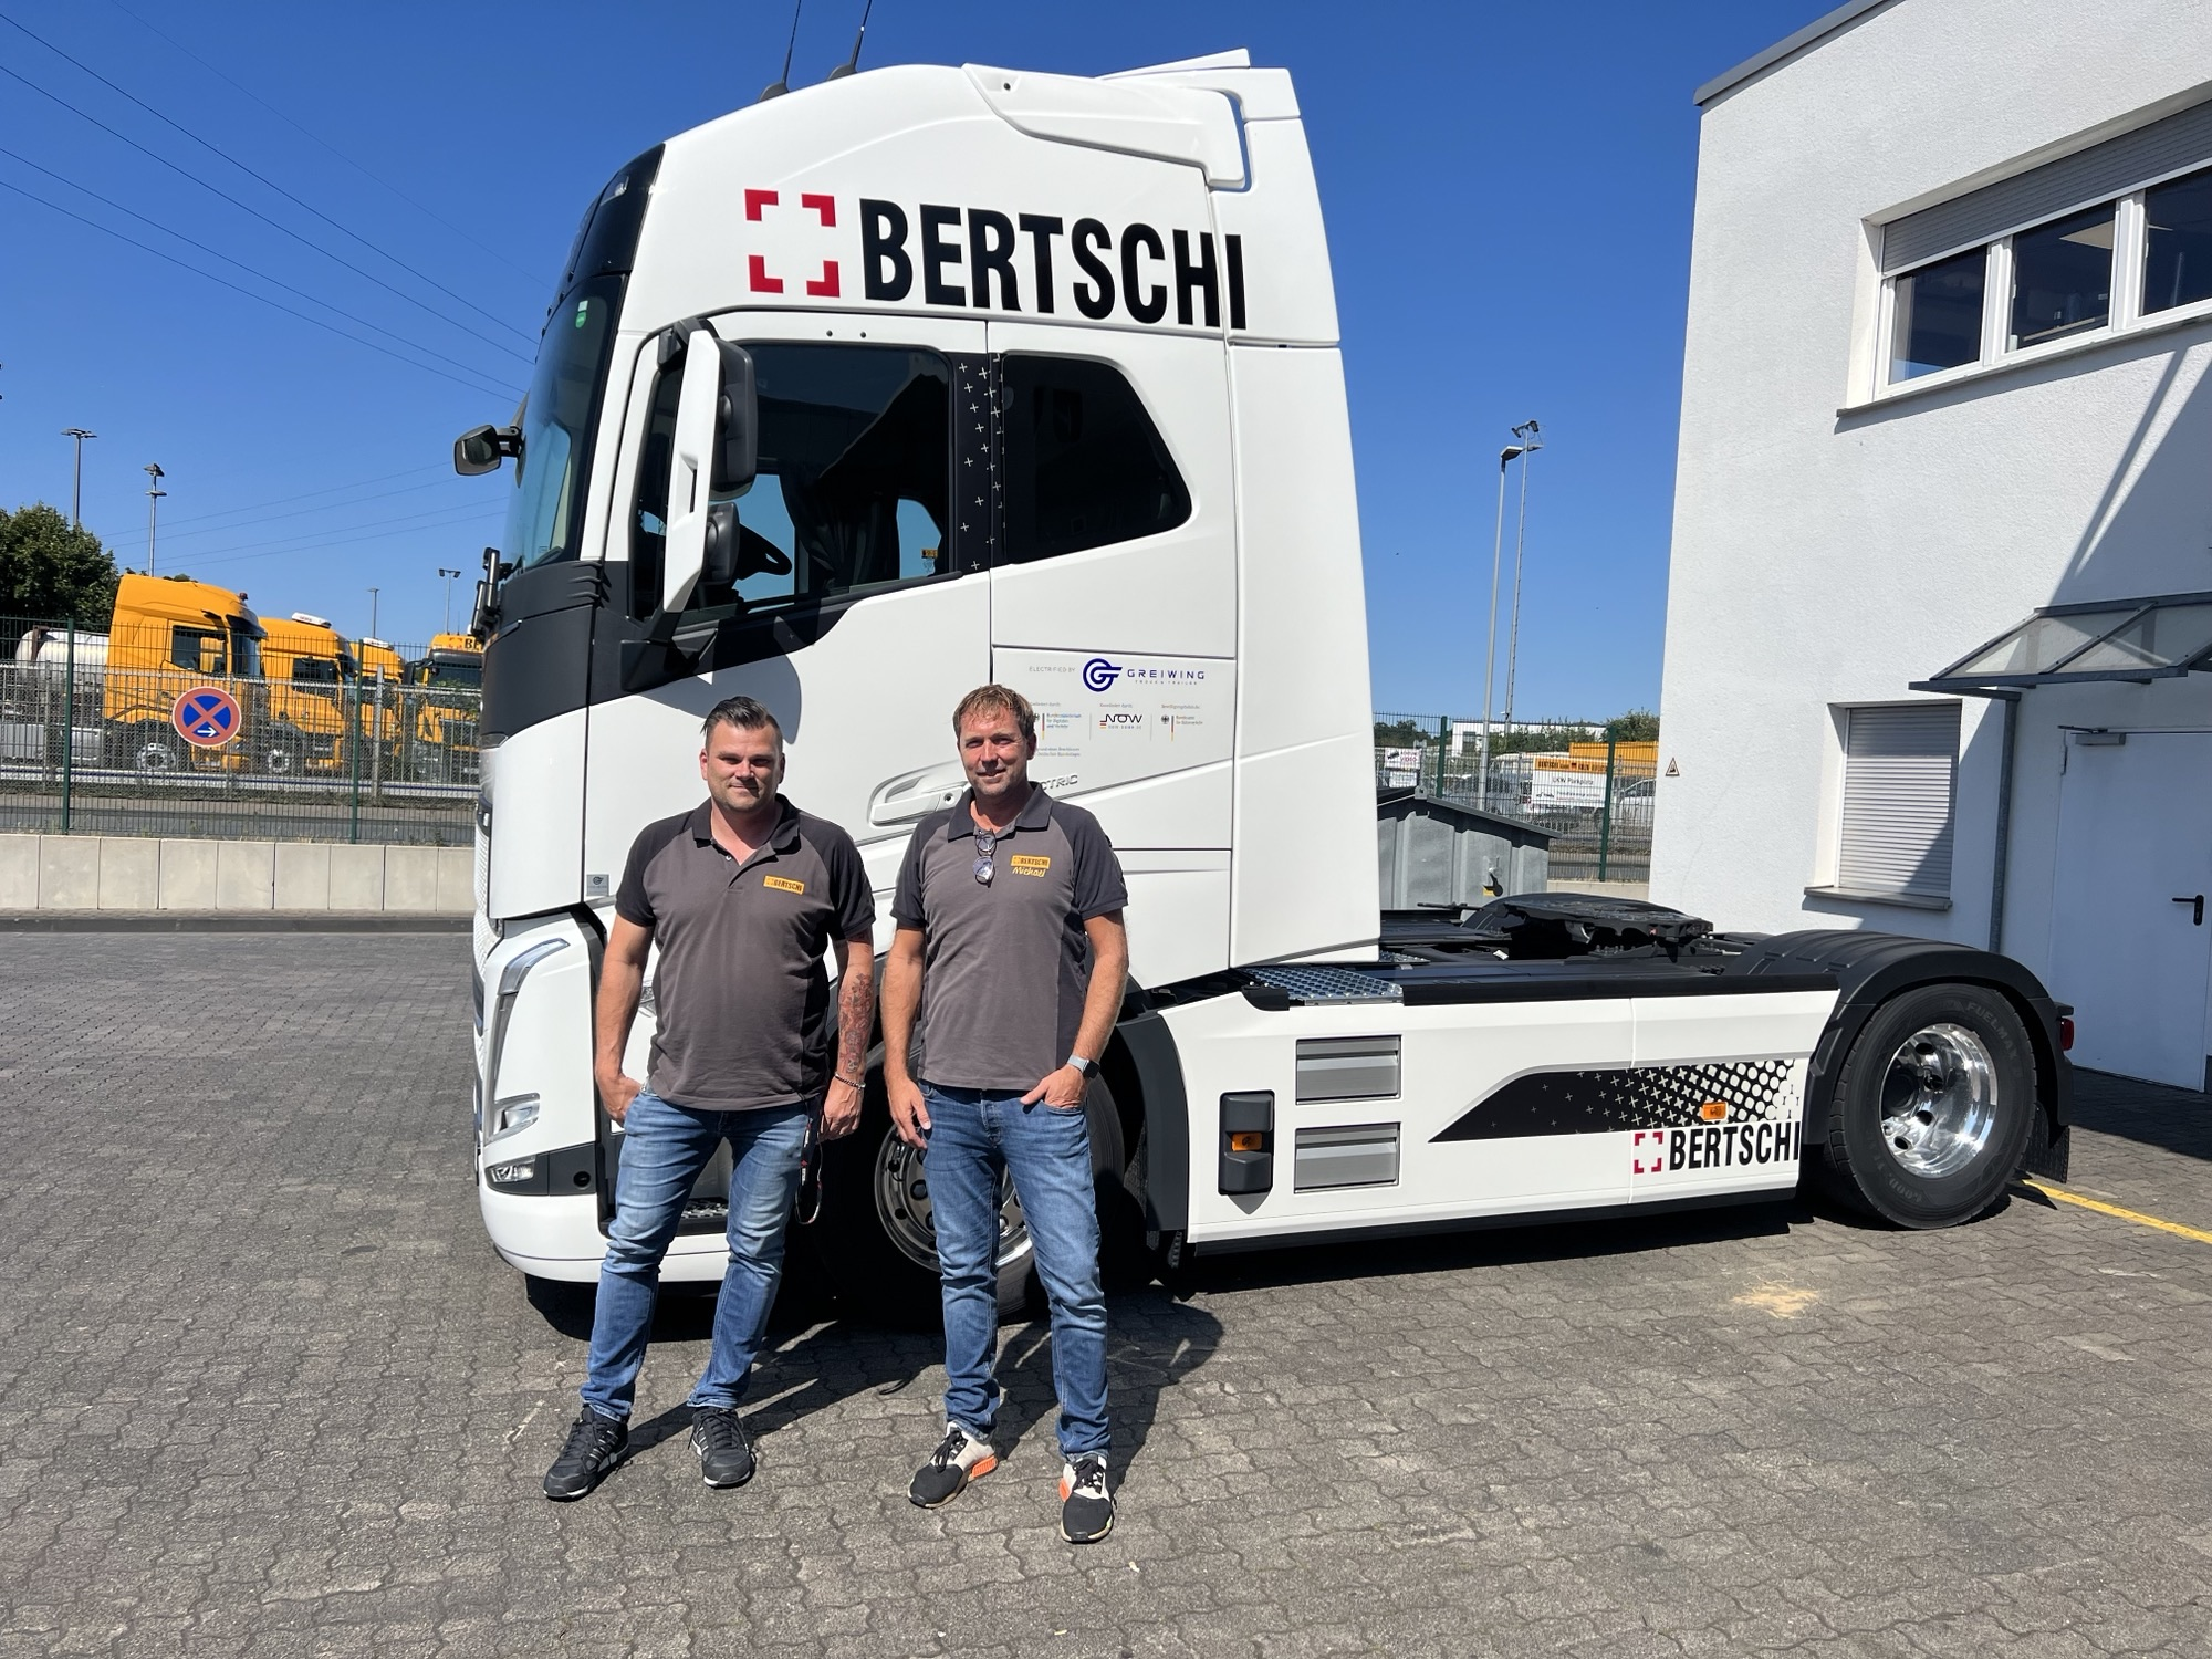 Bertschi Explores Electric Trucks for a Climate-Neutral Supply Chain